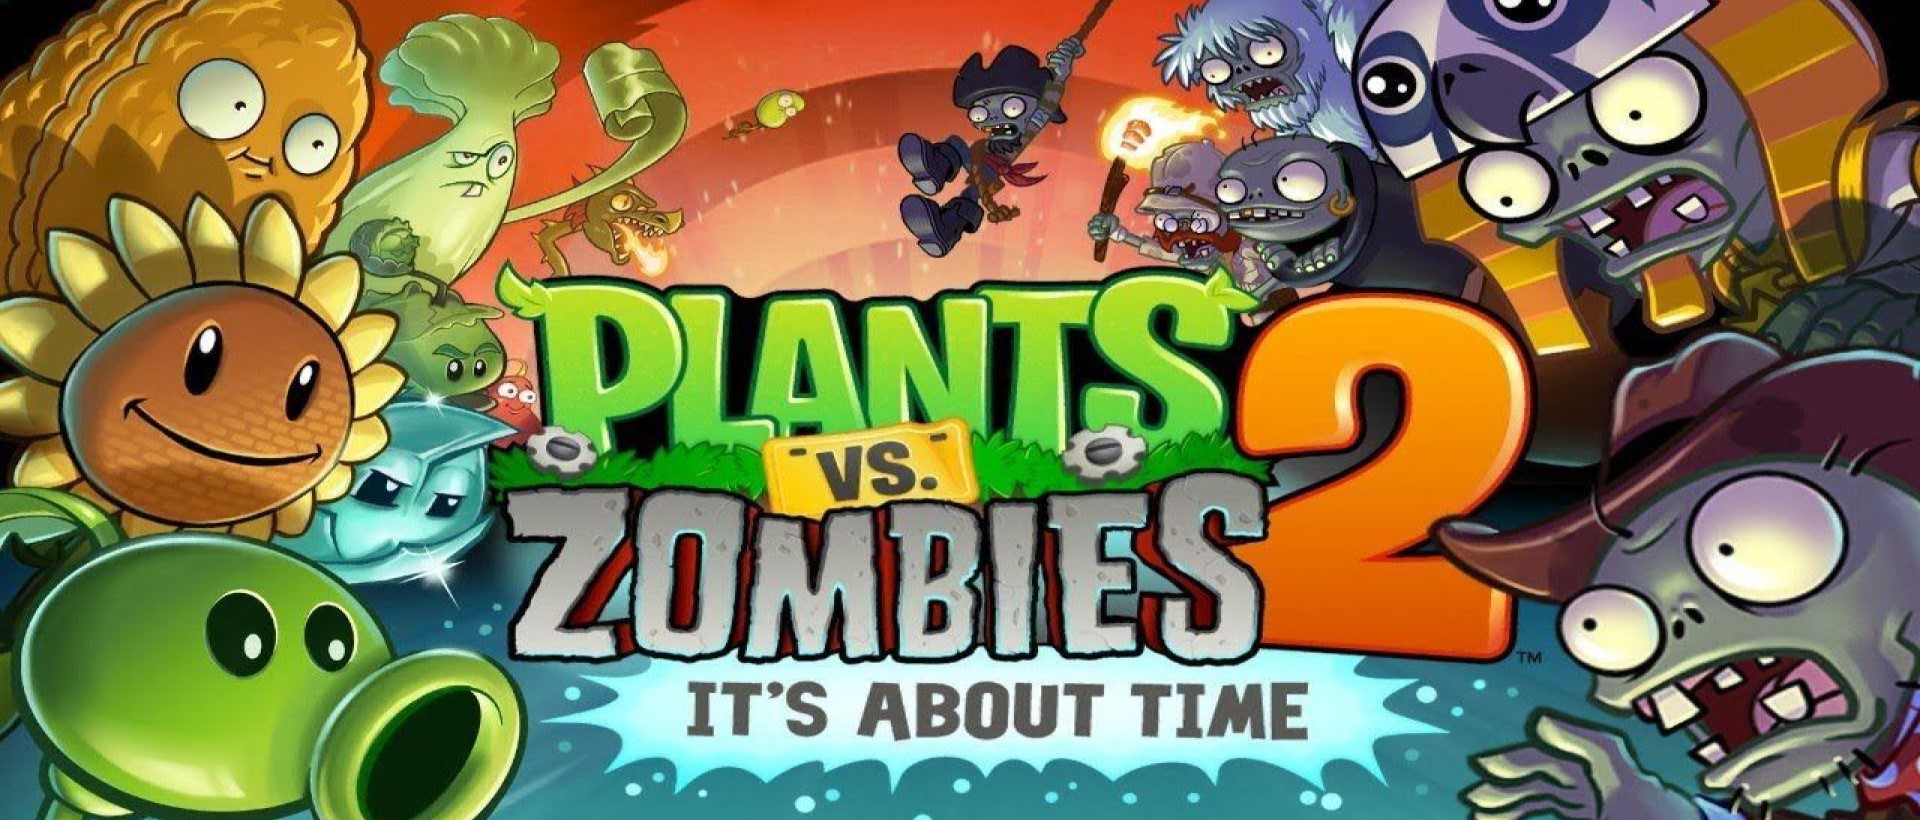 how to download pvz 2 on pc